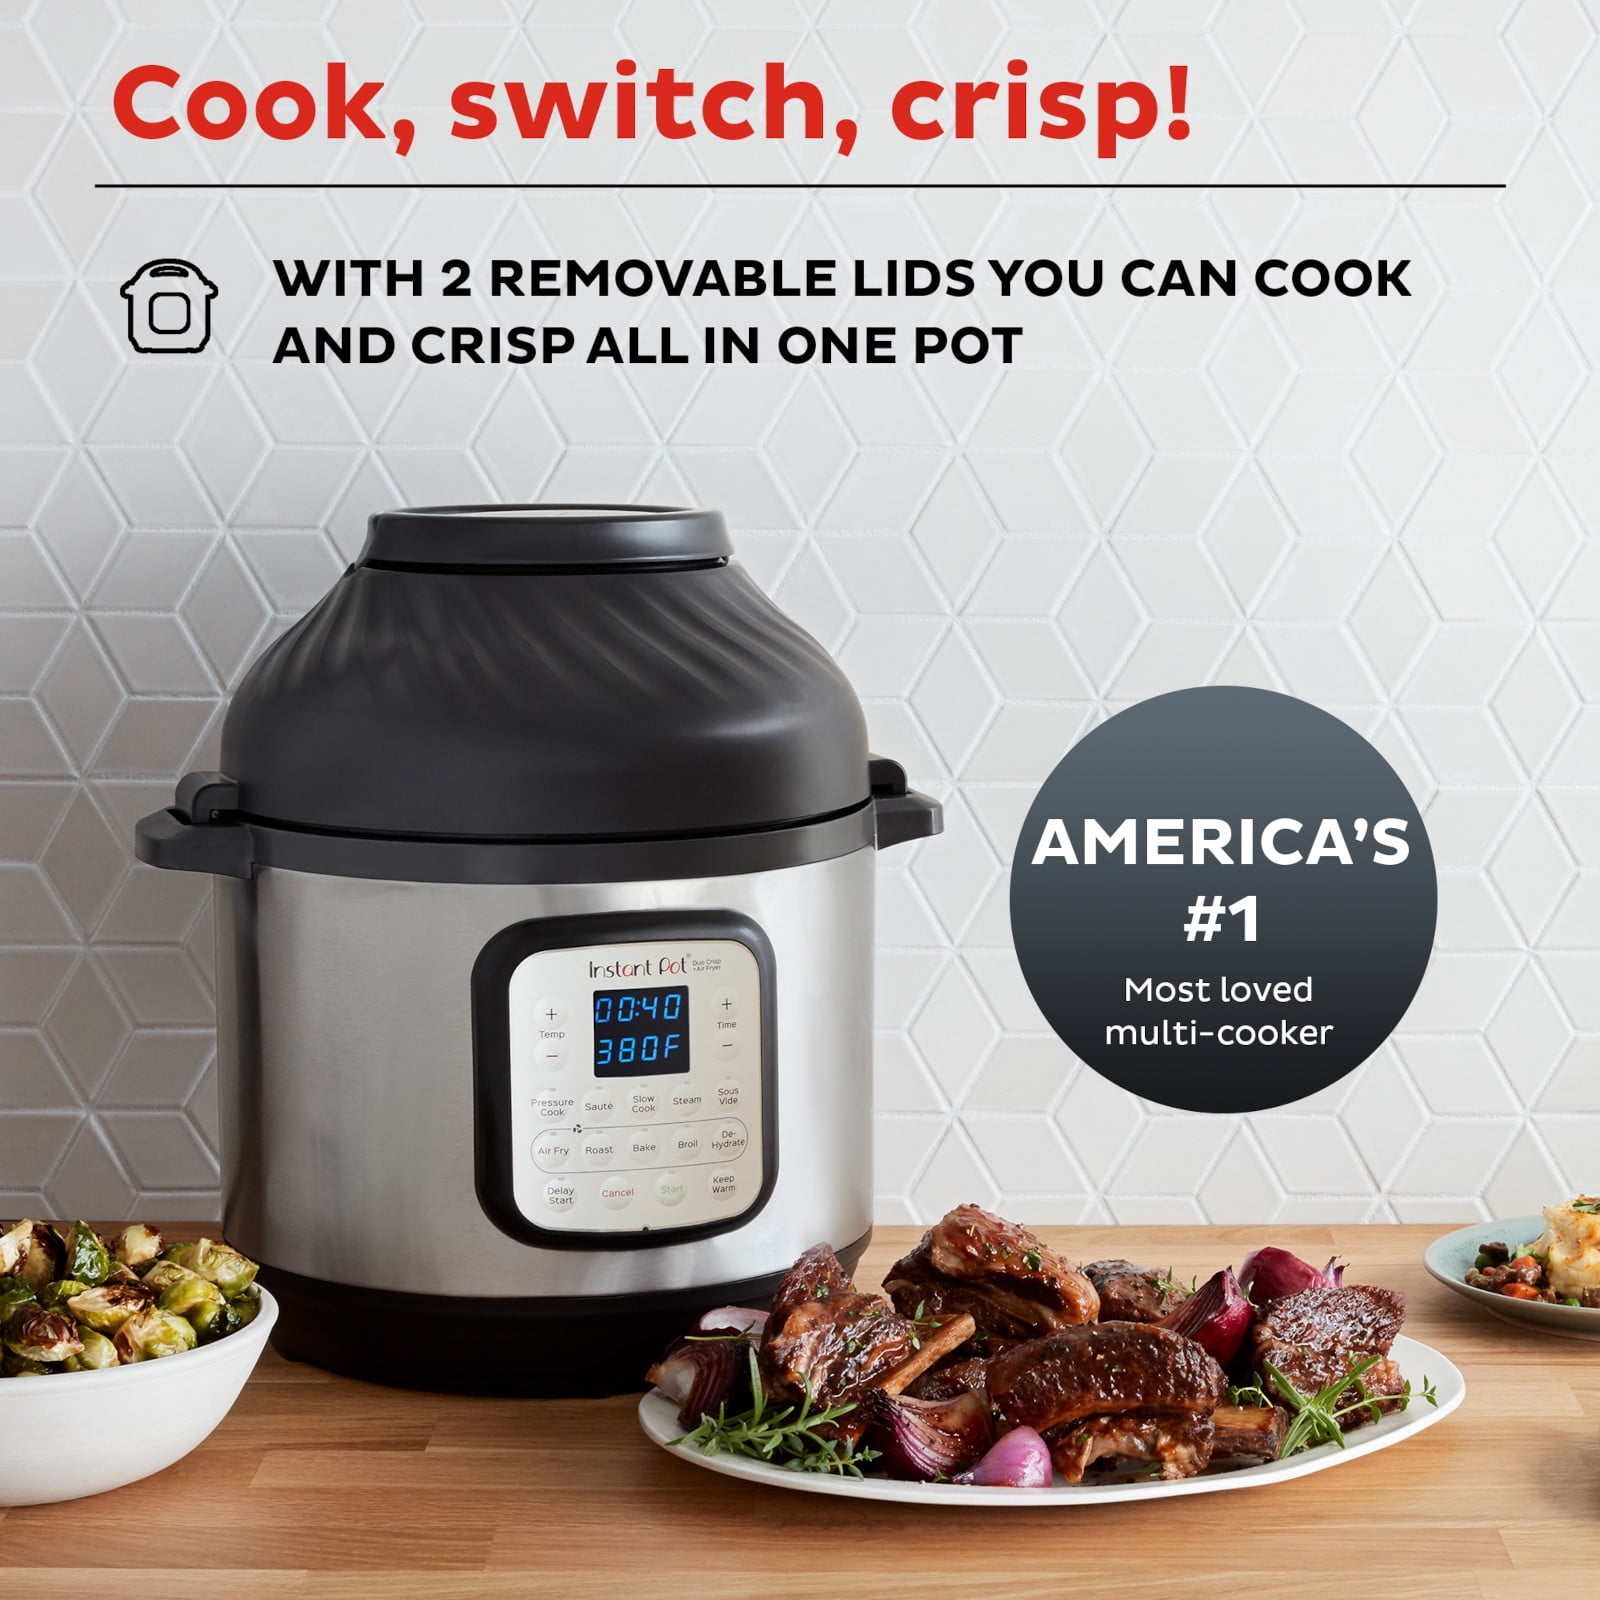 Instant Pot® Duo Multi Cooker - Silver/Black, 6 qt - Fred Meyer